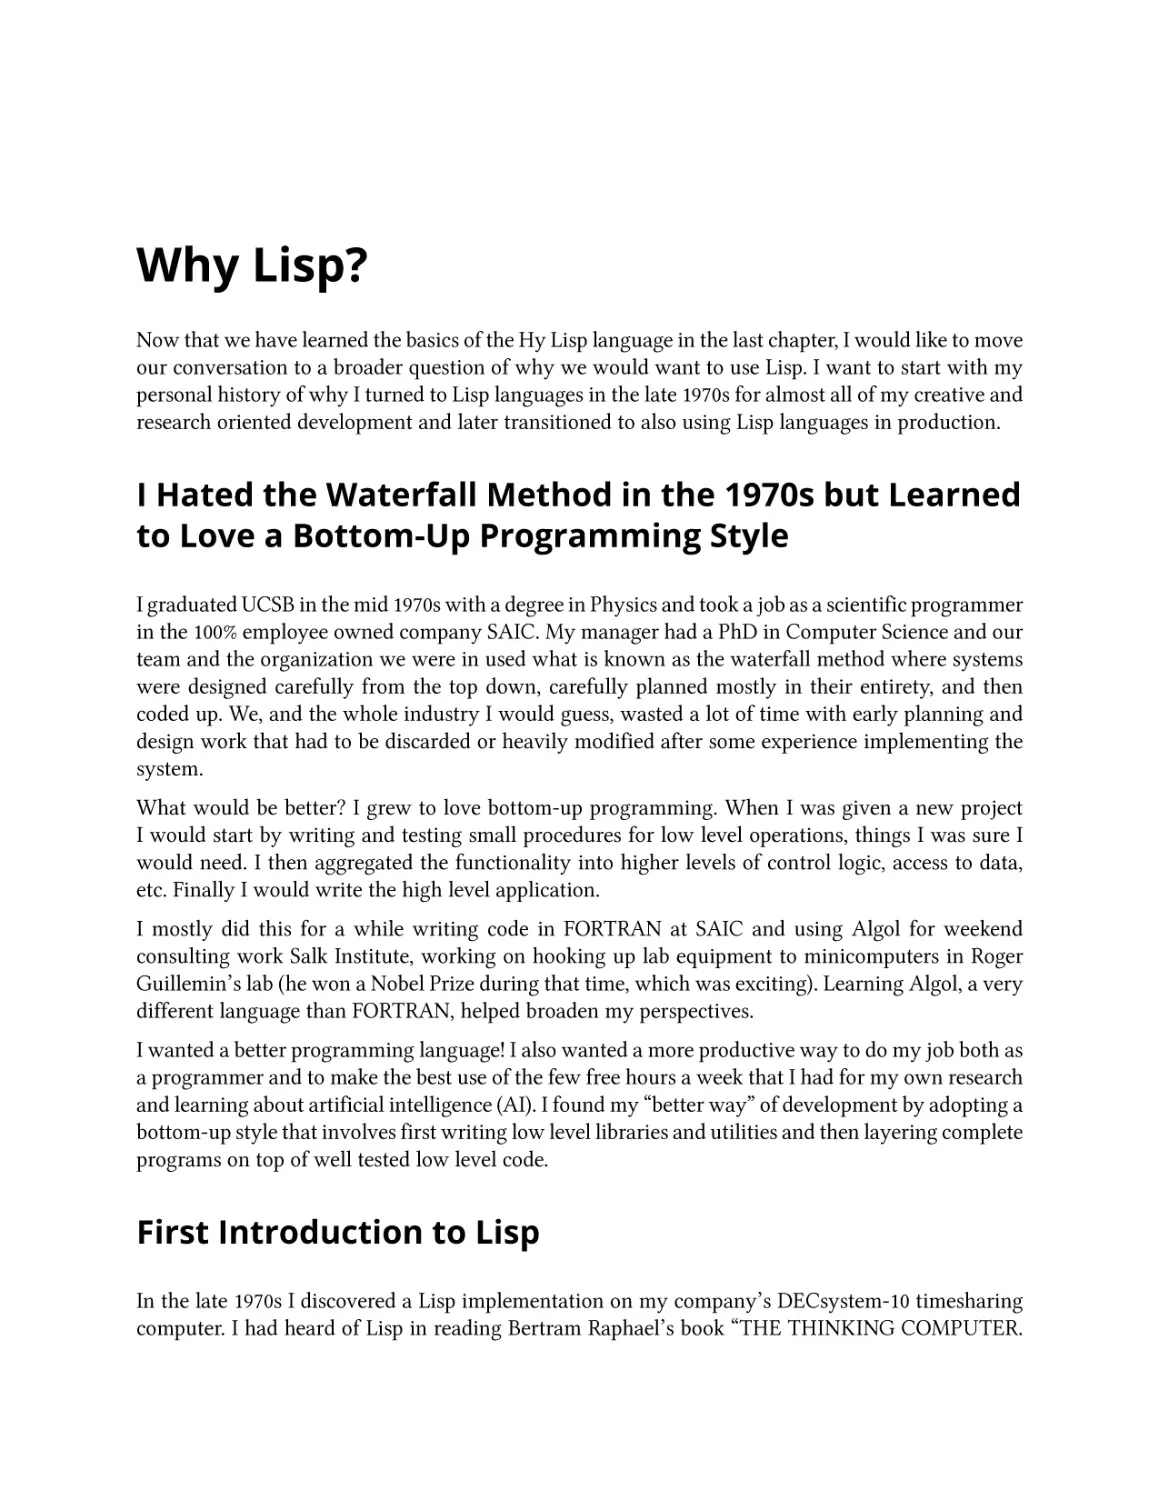 Why Lisp?
I Hated the Waterfall Method in the 1970s but Learned to Love a Bottom-Up Programming Style
First Introduction to Lisp